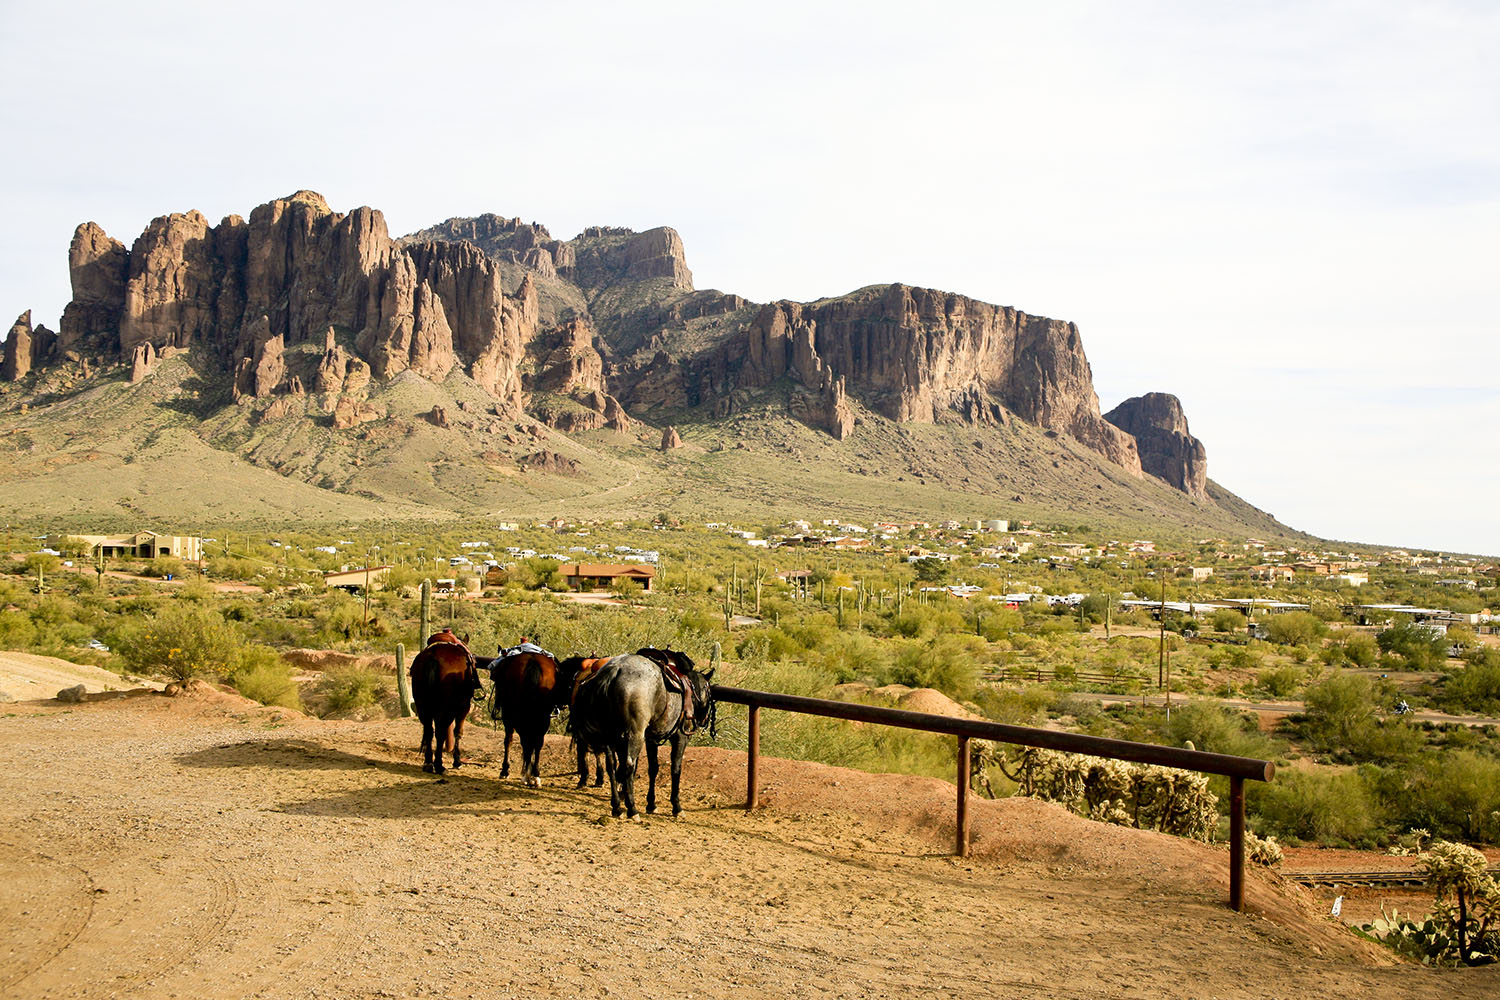 Horses tied to a post near rock formation.